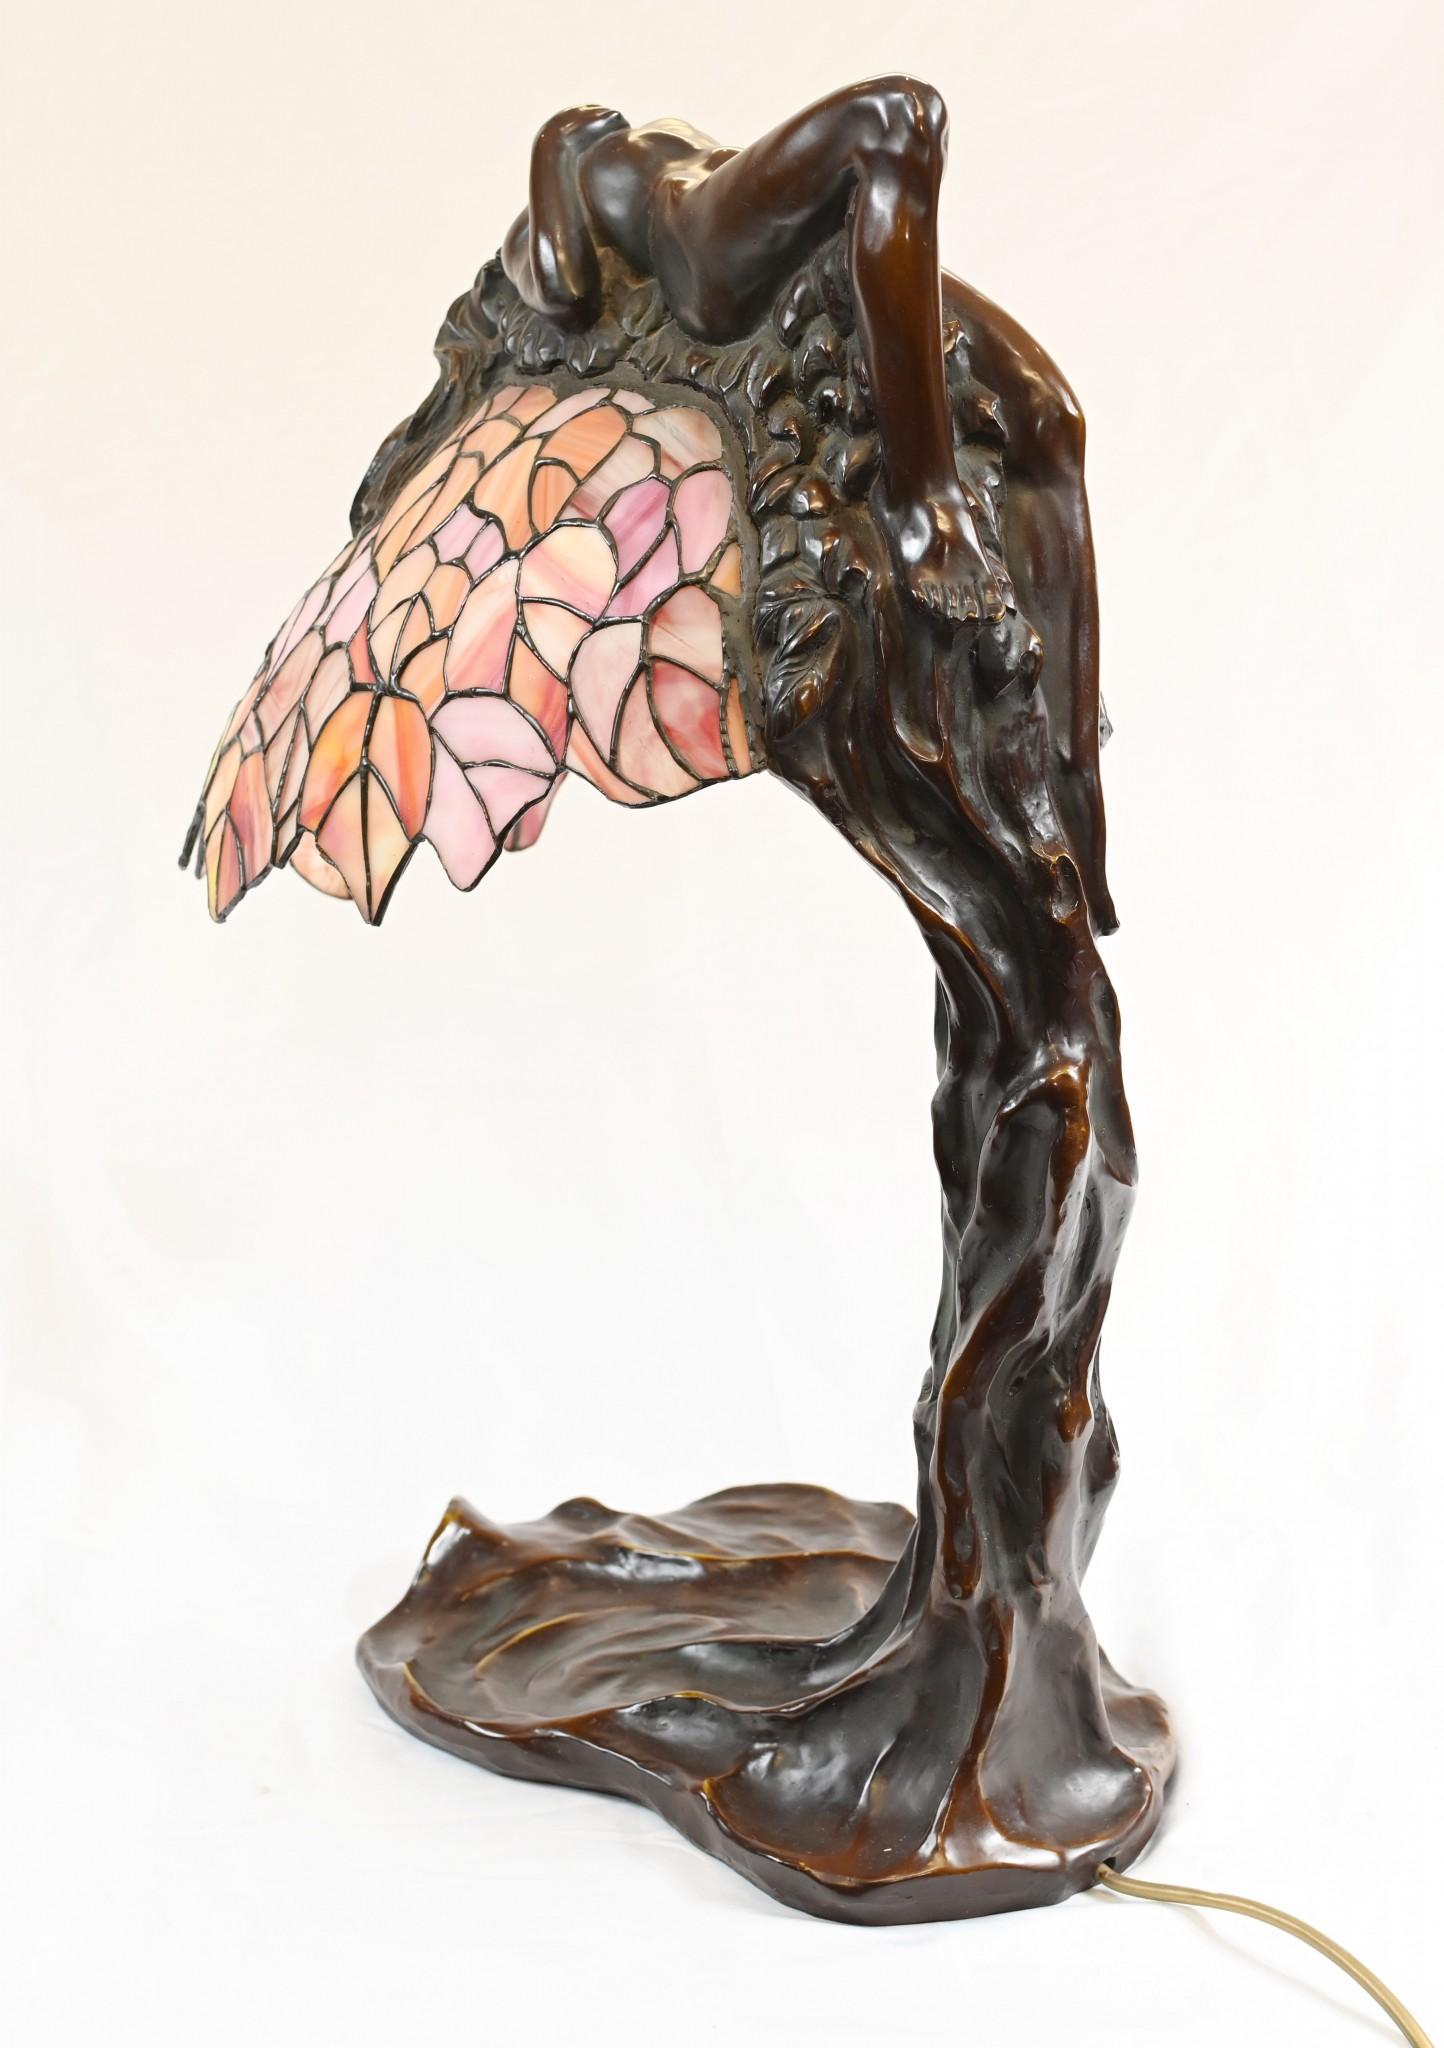 An unusual art nouveau style Tiffany lamp with a bronze female arched over the leaded glass shade.
Circa 1950
Classic Tiffany shade with lovely shades of pink
Purchased from a dealer on Rue de Rossiers at the Paris antiques markets
Some of our